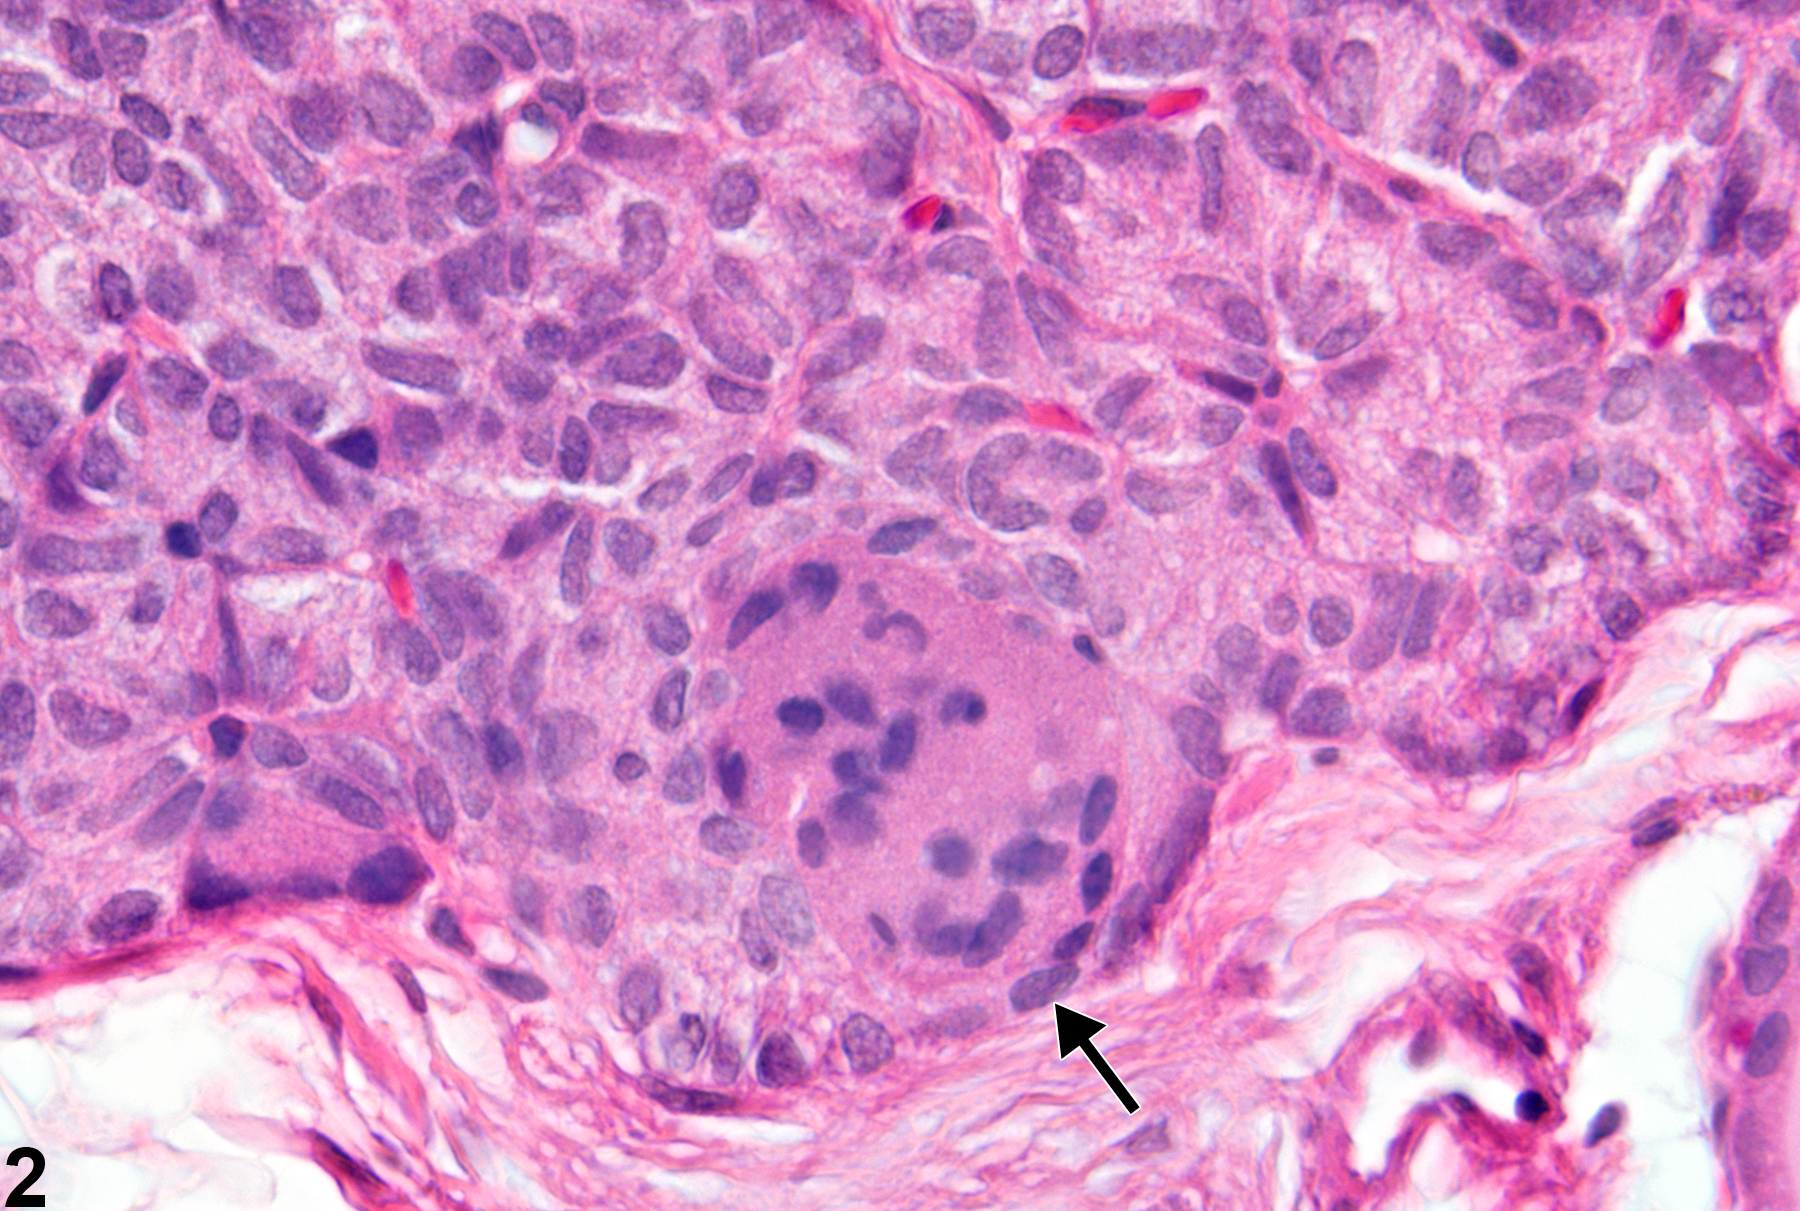 Image of syncytial giant cell in the parathyroid gland from a male F344/N rat in a subchronic study